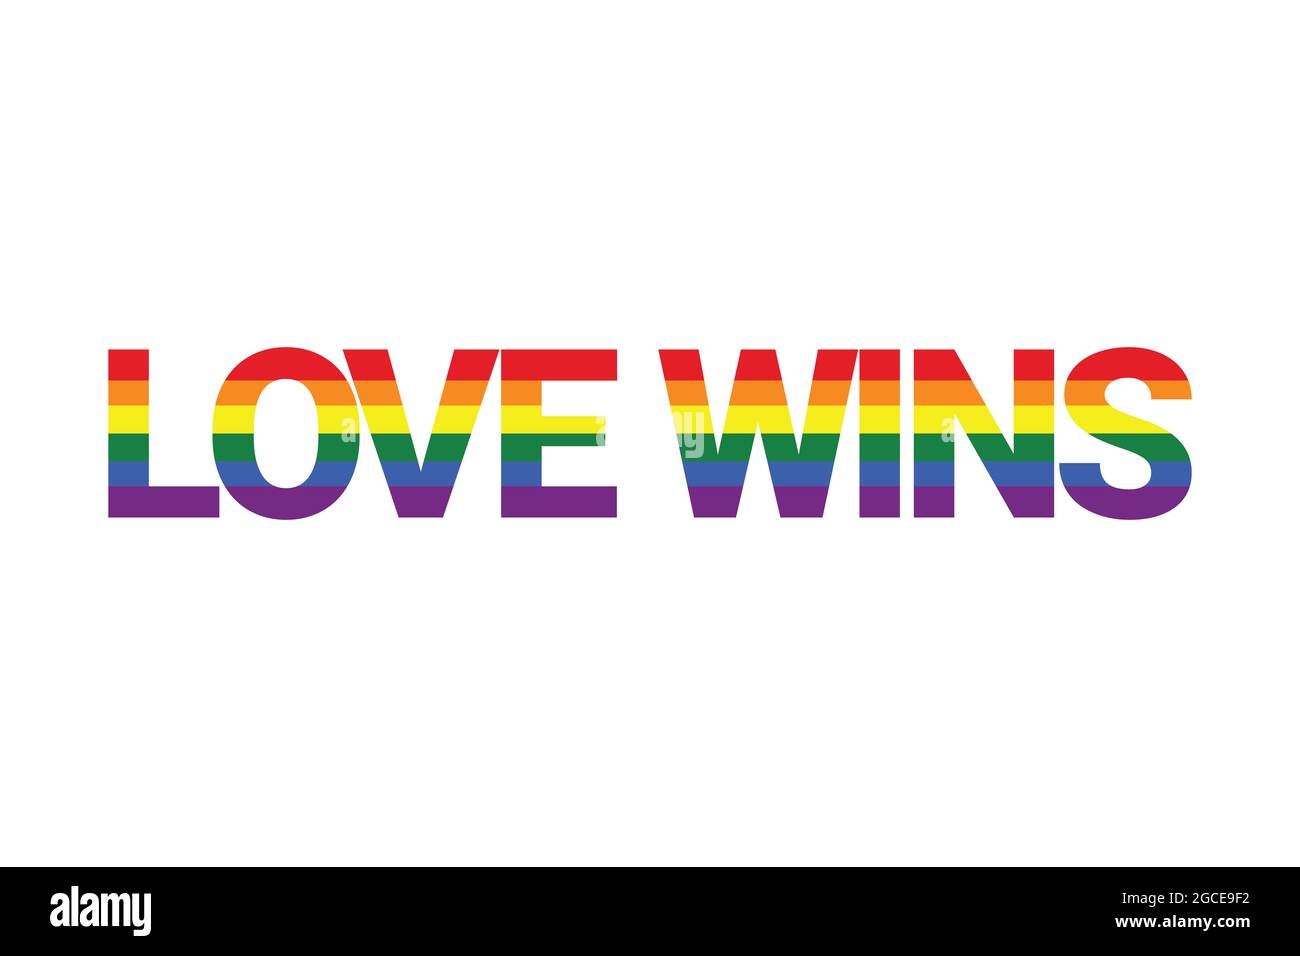 Modern, colorful, vibrant typographic graphic design of saying 'Love Wins' in rainbow flag colors. Simple, bold, vibrant and urban graphic vector art. Stock Photo